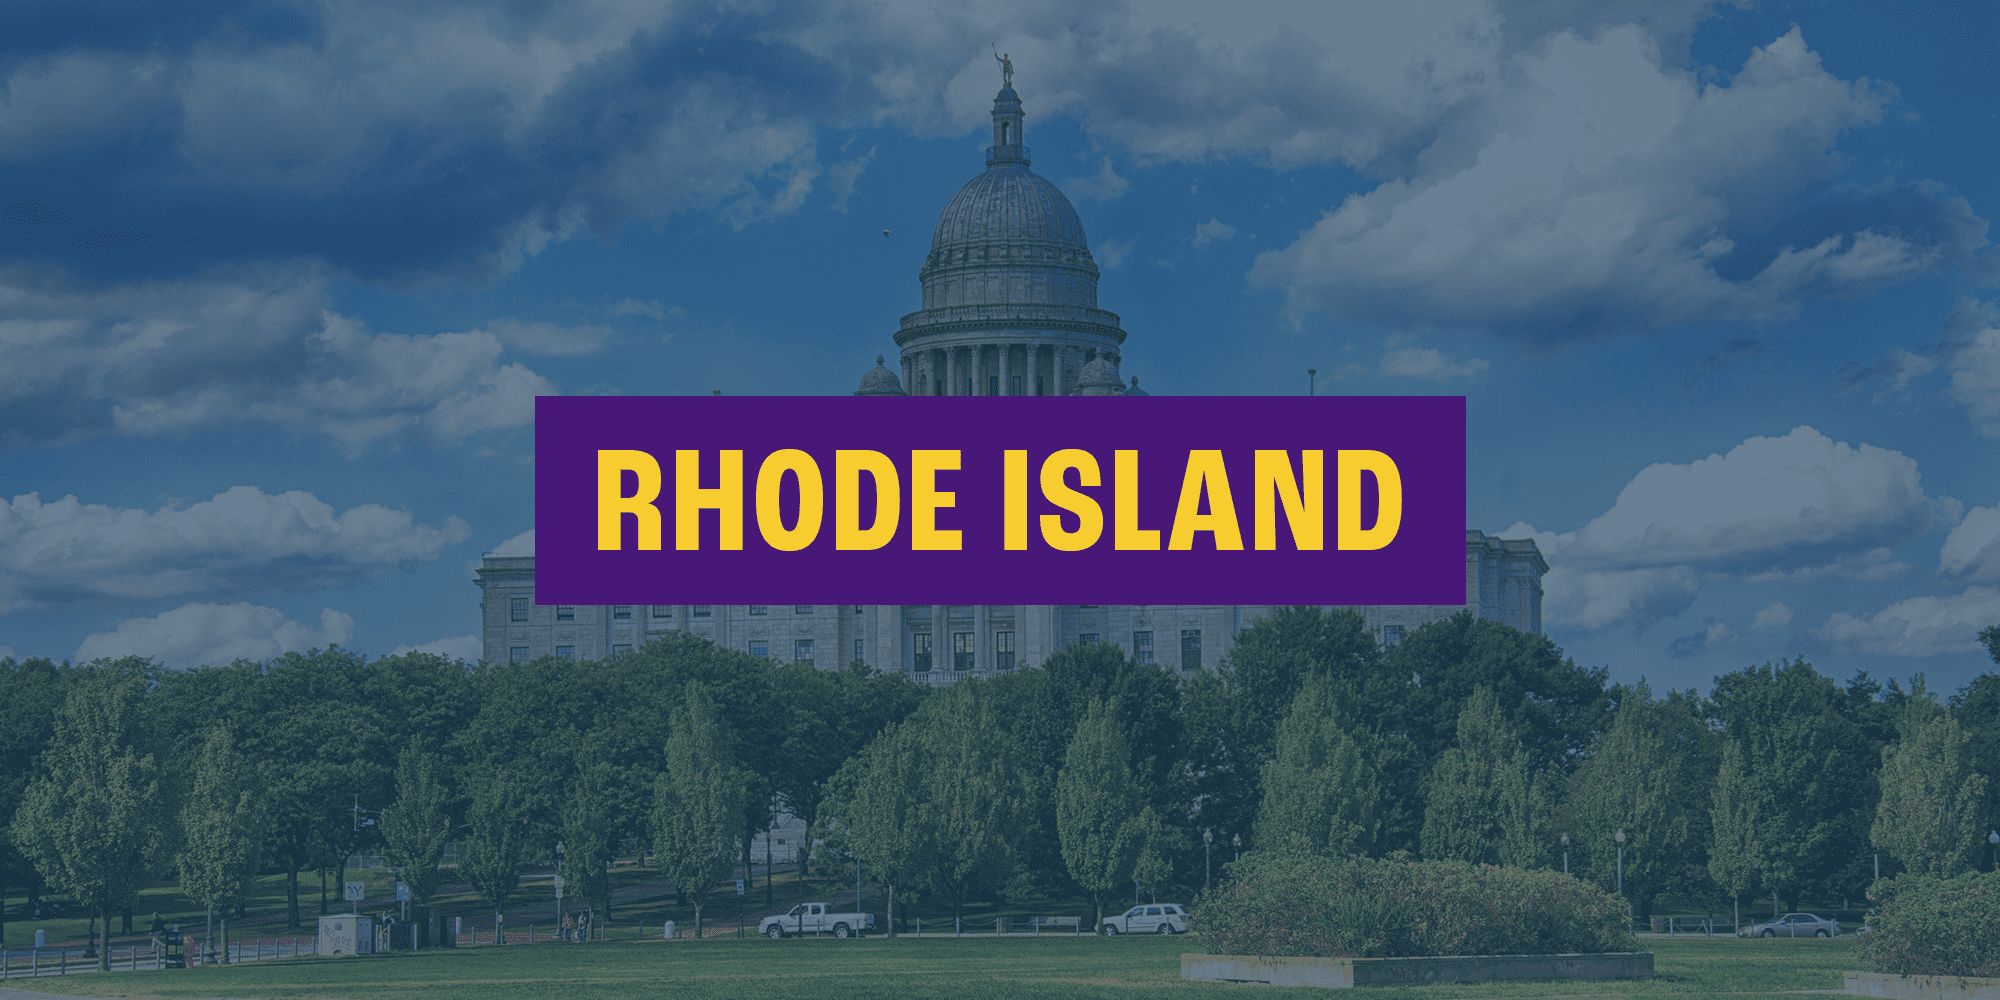 Rhode Island’s 1st Congressional District needs ranked choice voting